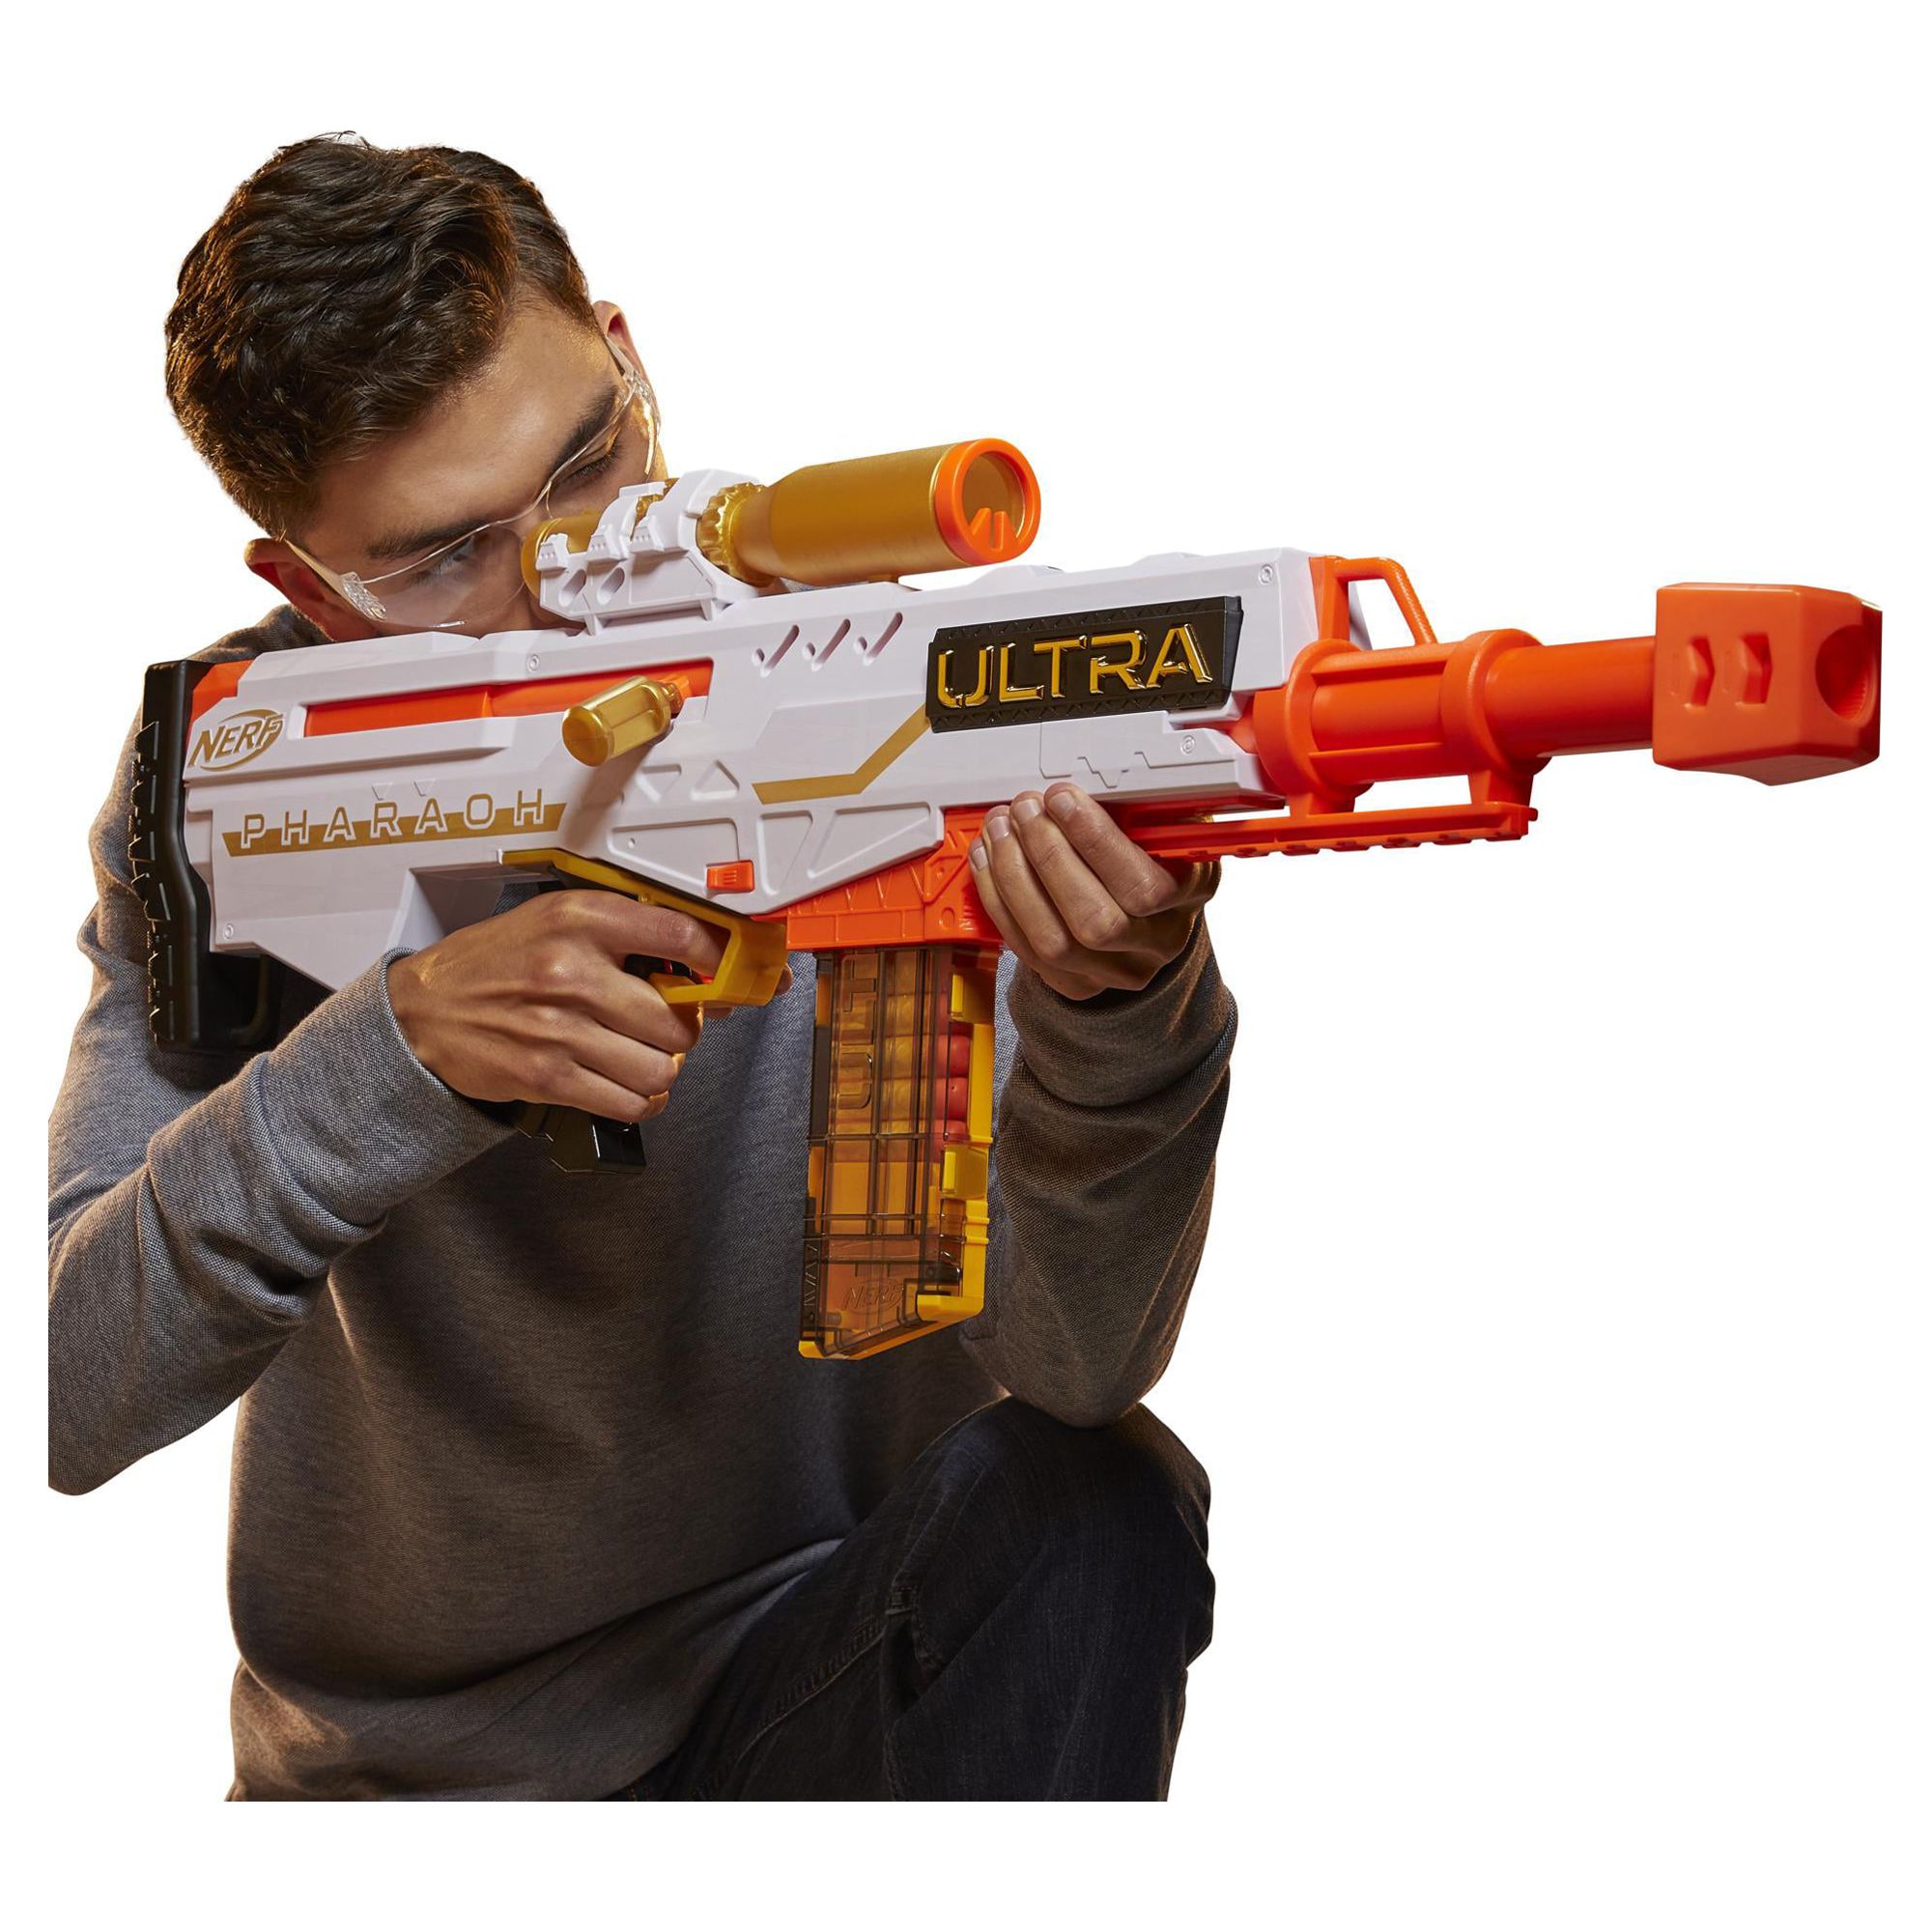 Nerf Ultra Pharaoh Blaster -- Gold Accents, 10-Dart Clip, 10 Nerf Ultra Darts, Compatible Only with Nerf Ultra Darts - image 5 of 7